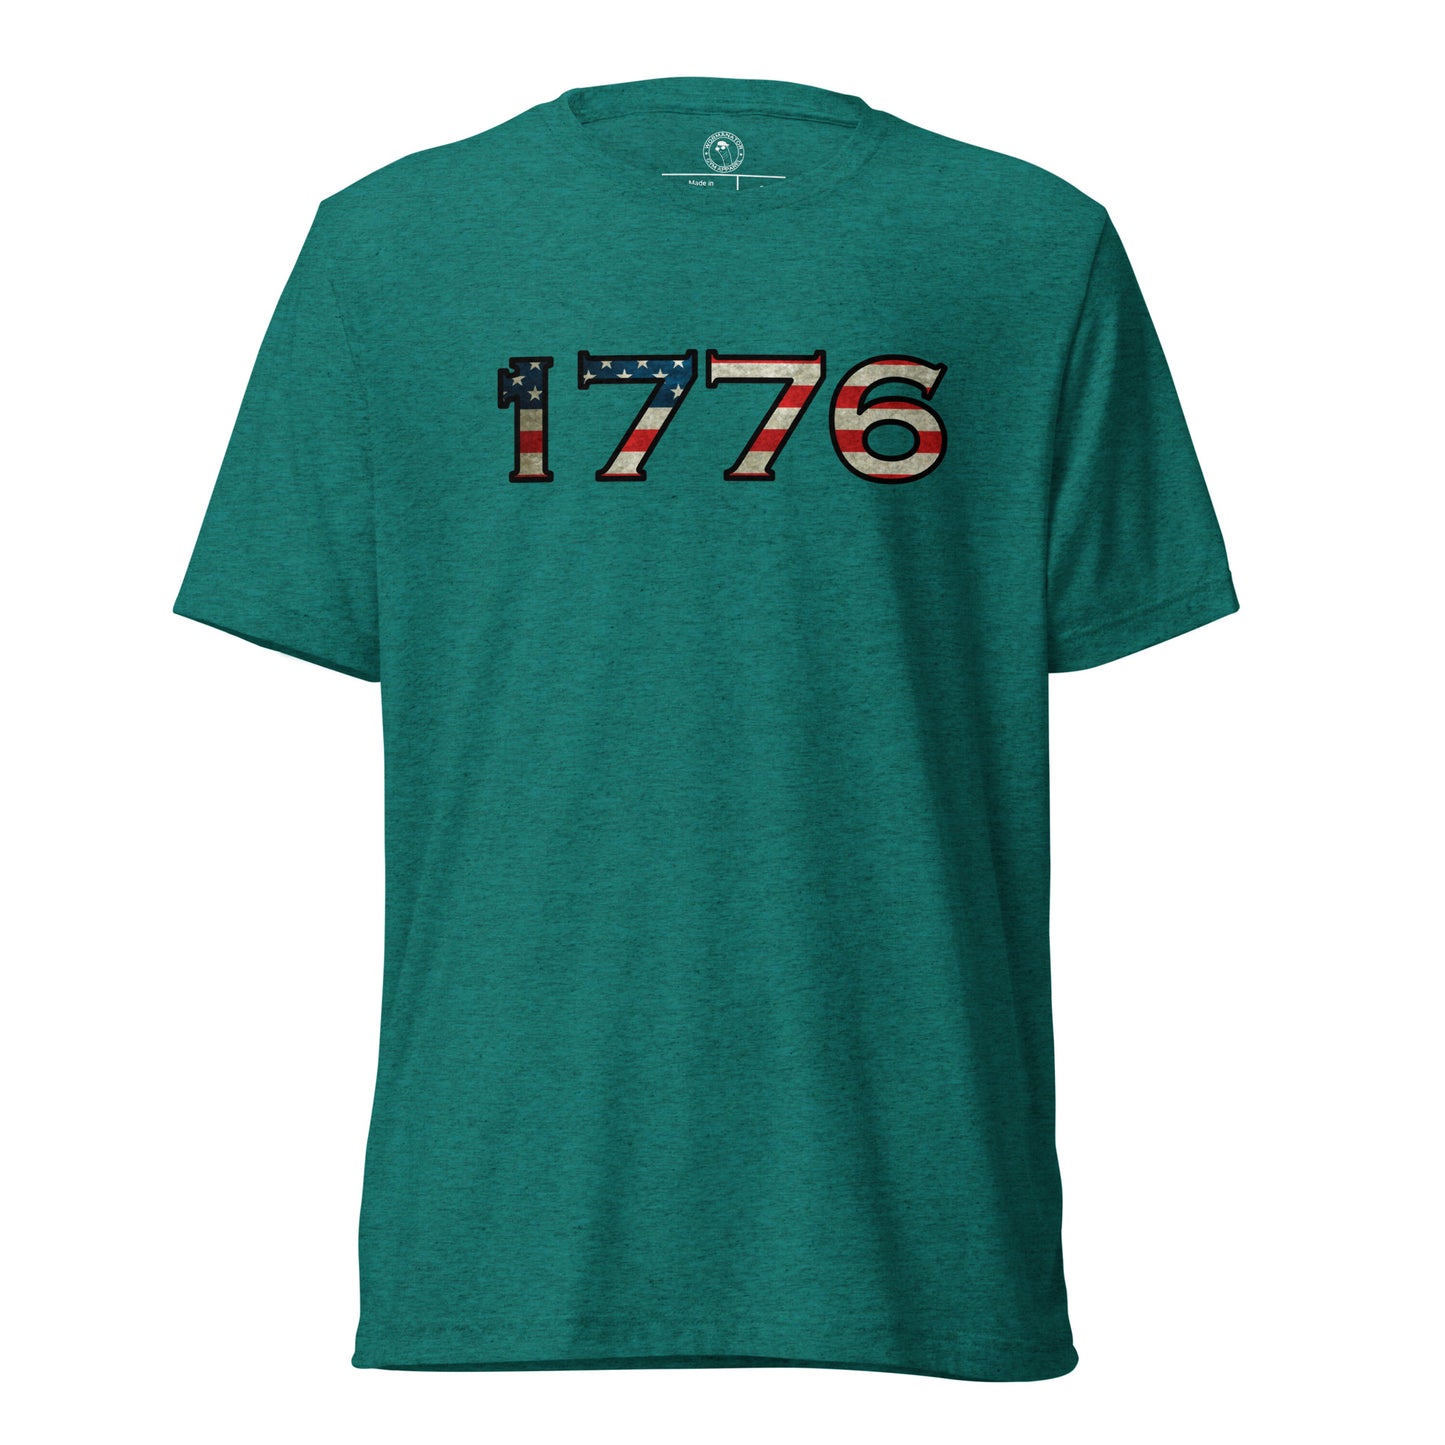 1776 T-Shirt in Teal Triblend